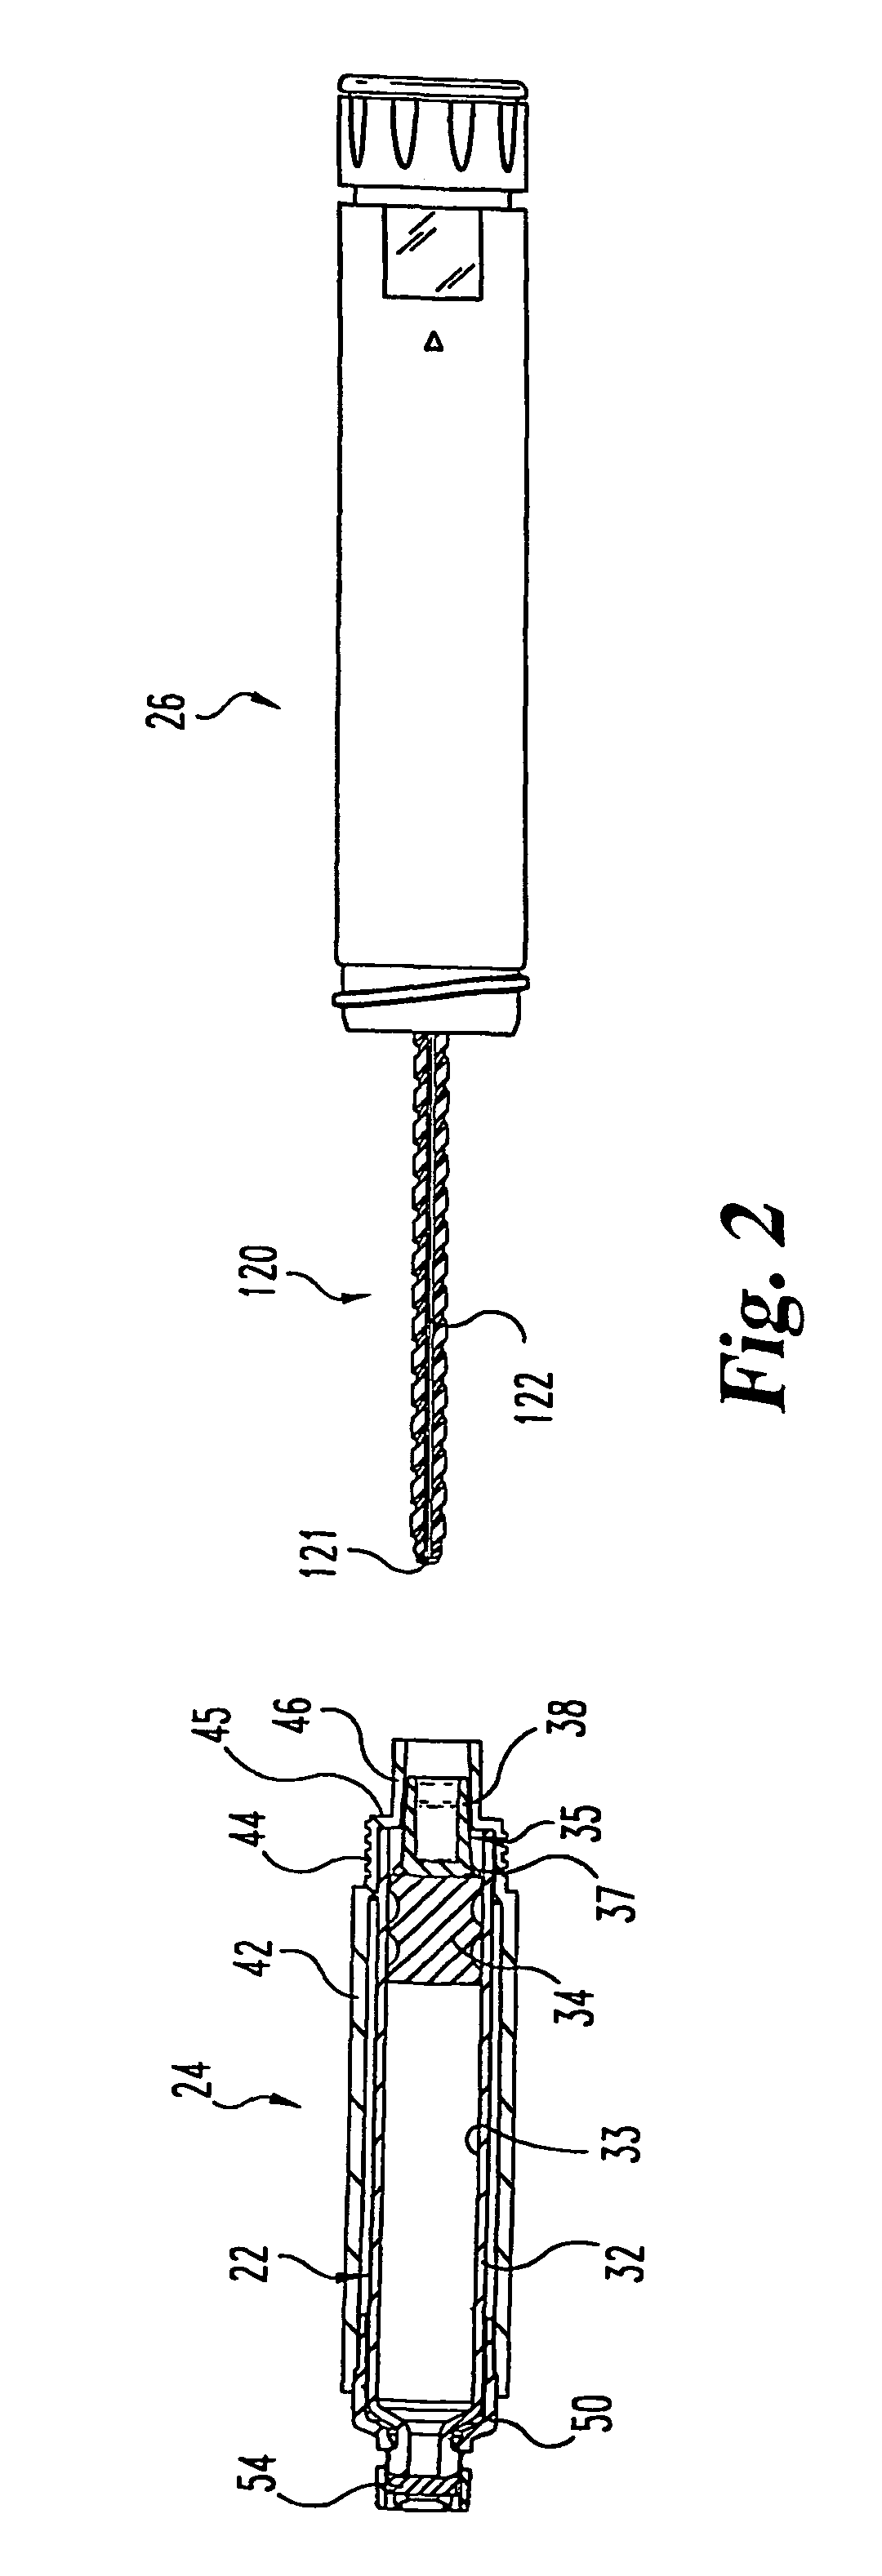 Medication injector apparatus with drive assembly that facilitates reset